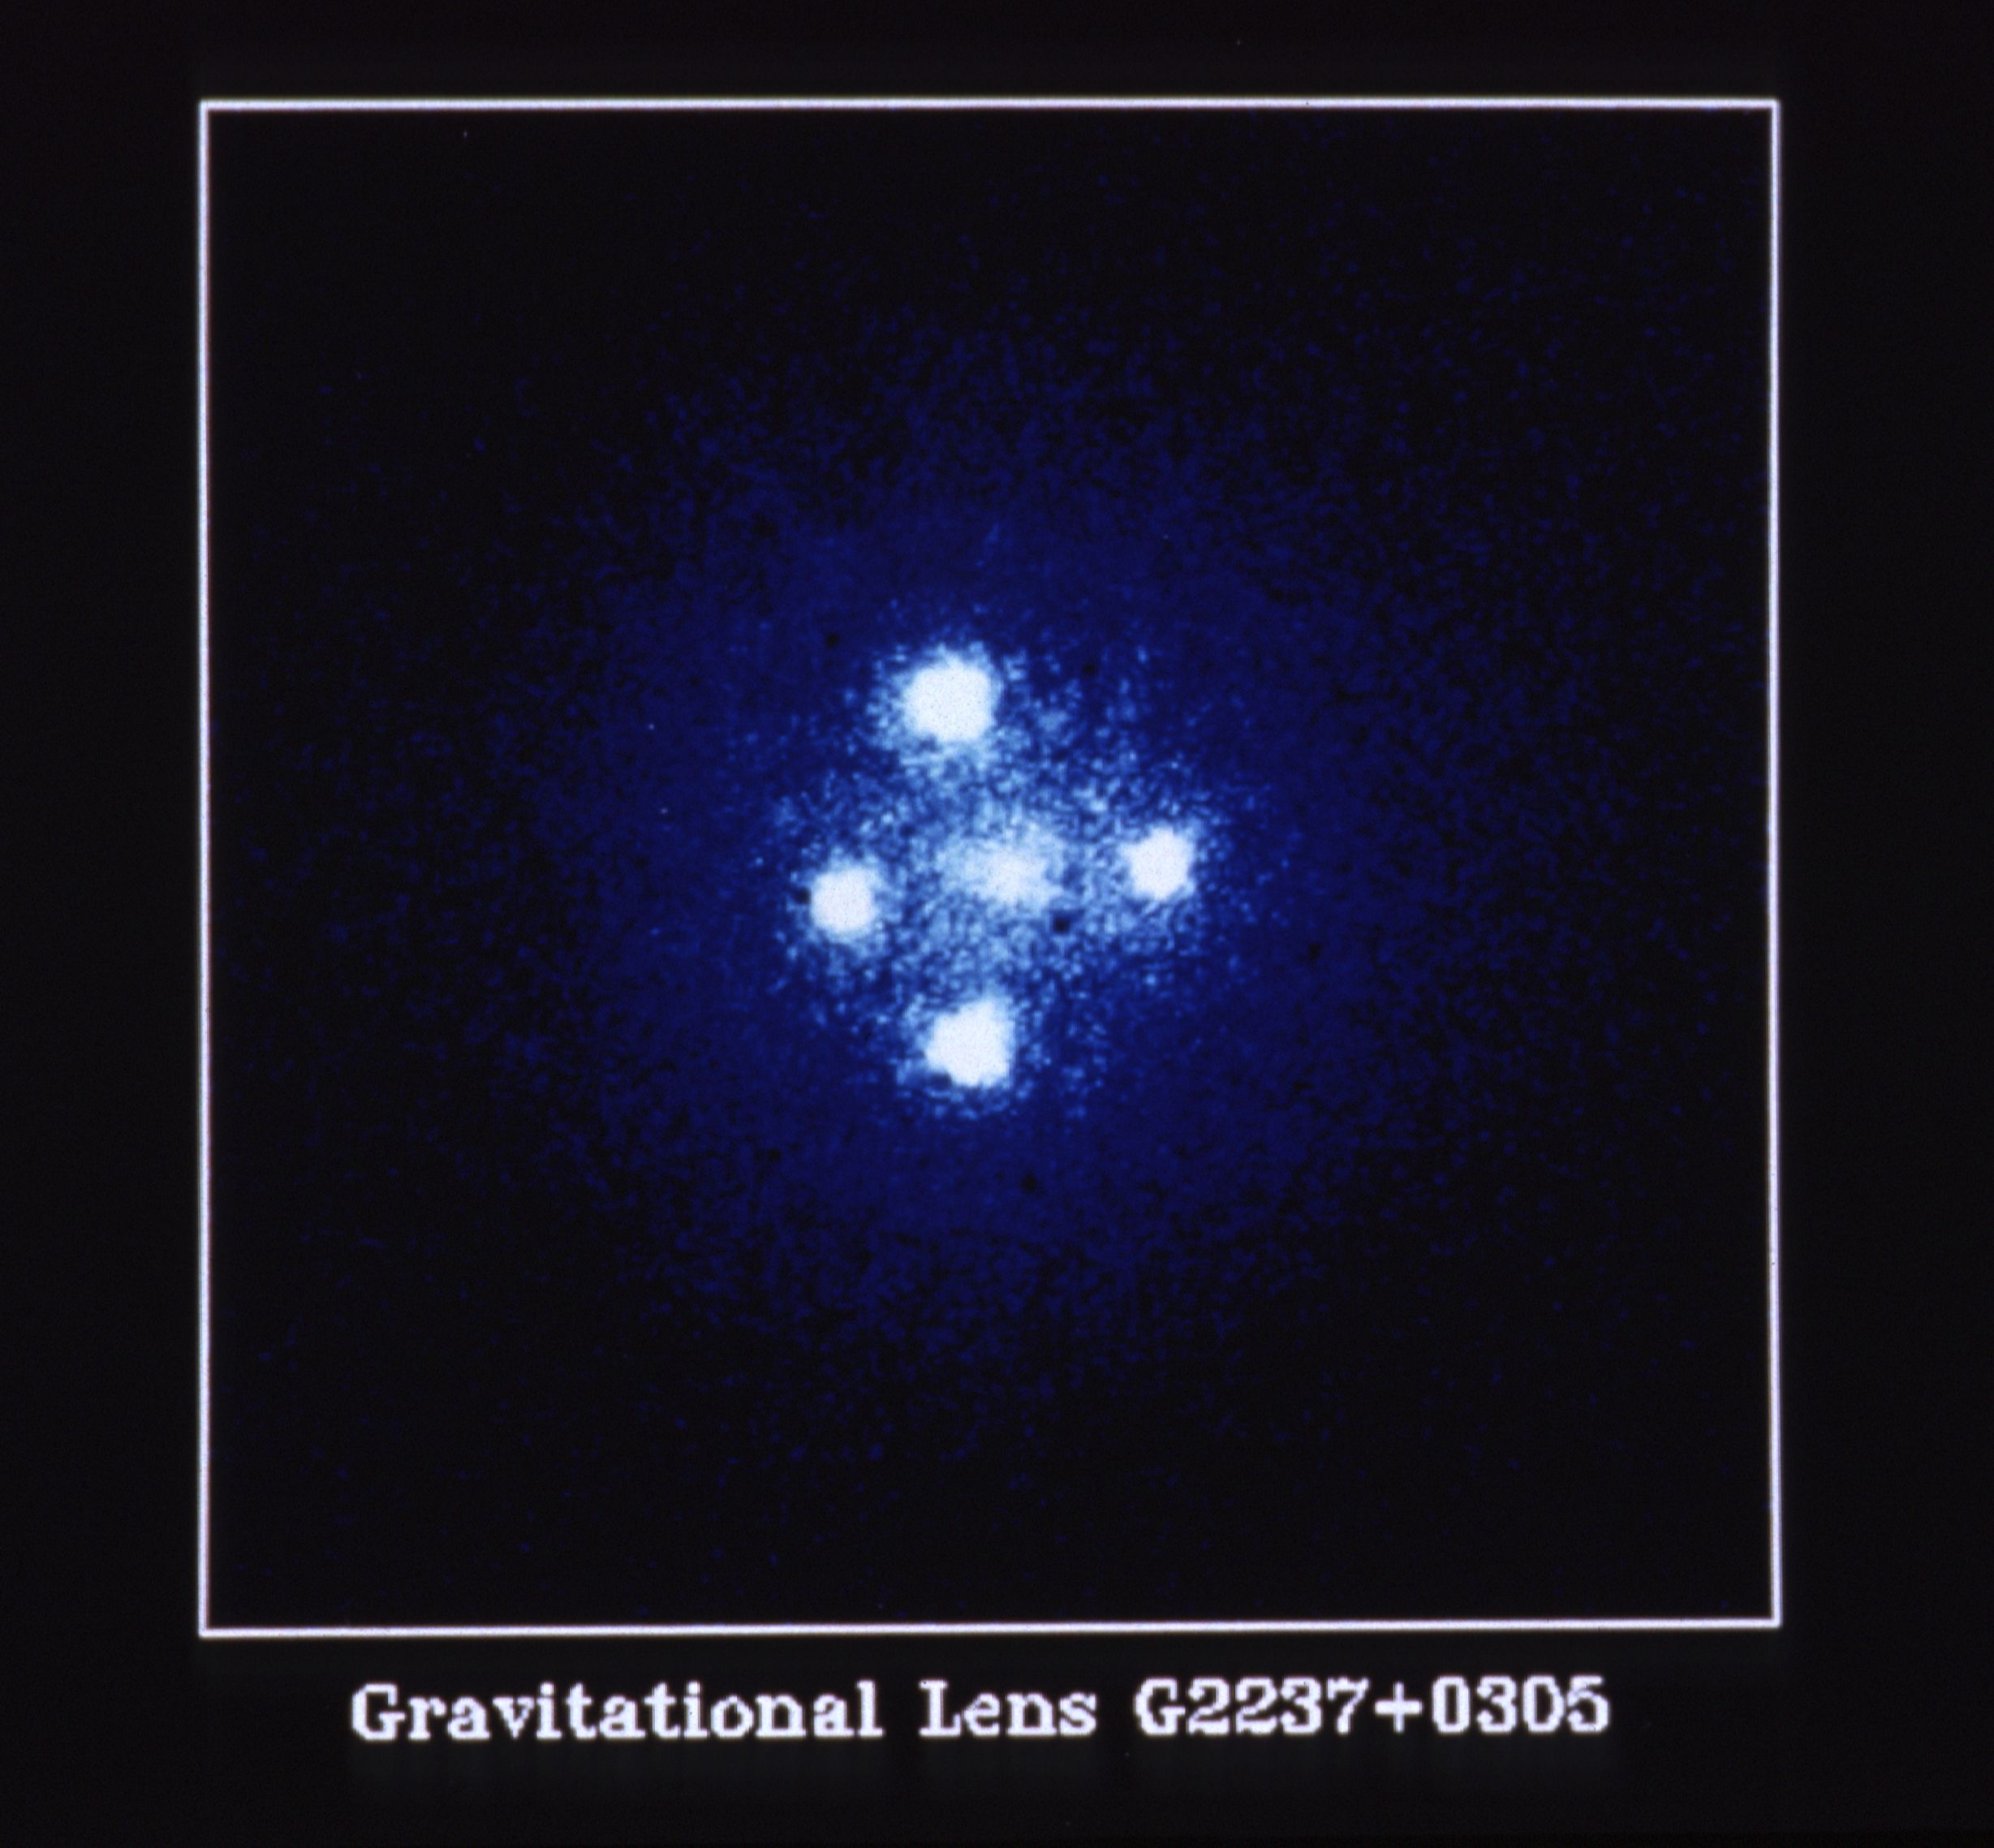 Five bright points of blue-white light. The center point is the galaxy. The four other points are above, below, and left, and right of the center.